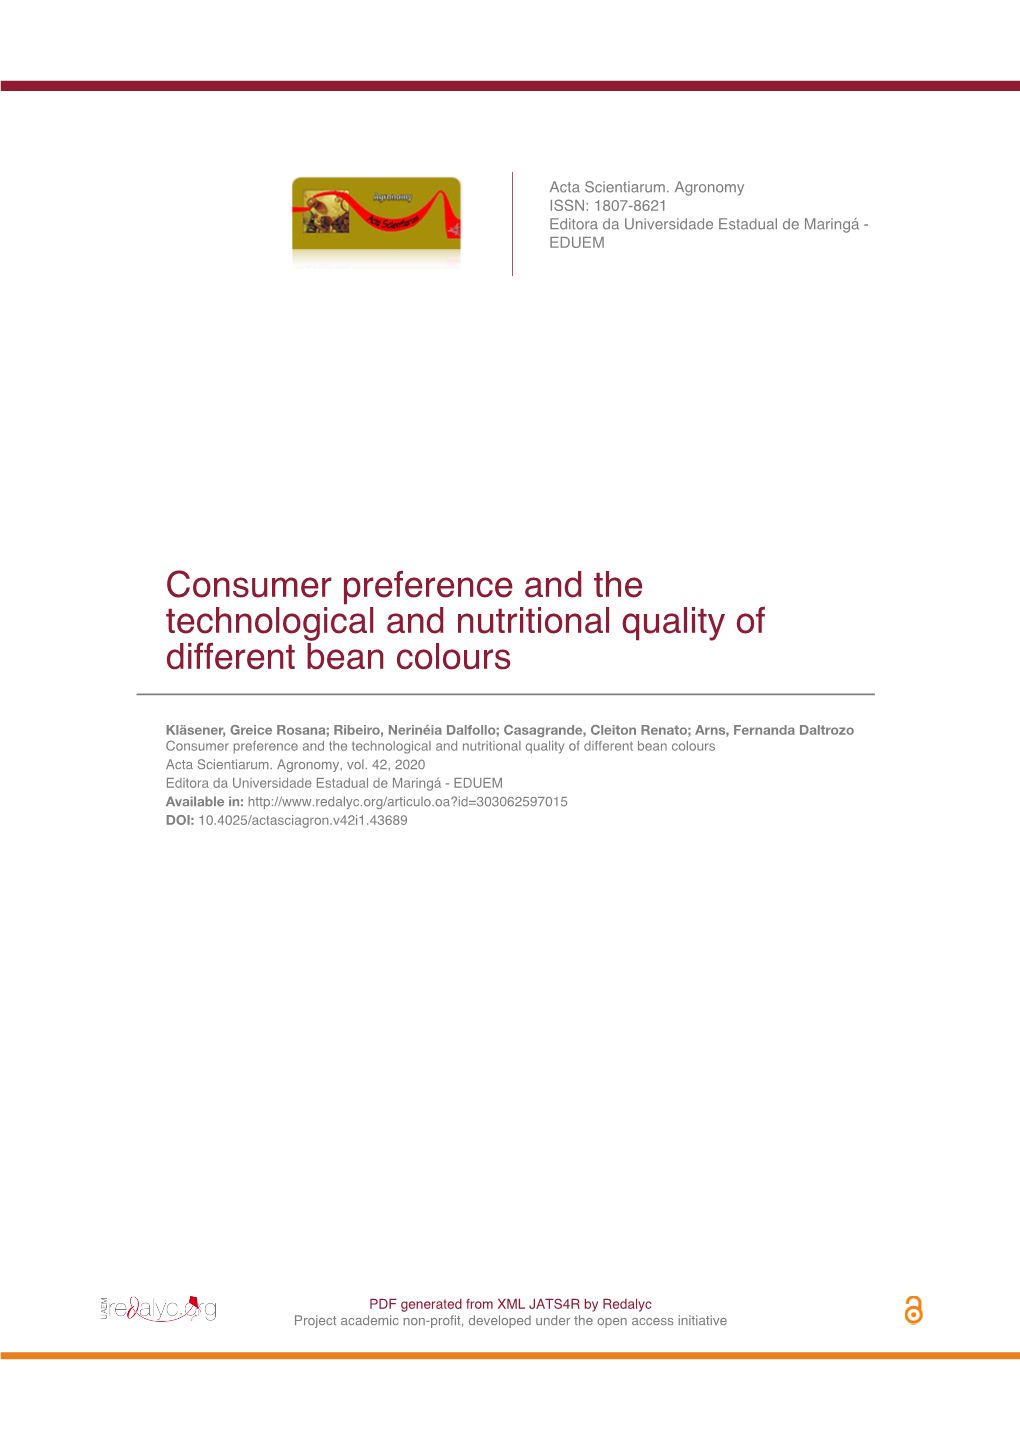 Consumer Preference and the Technological and Nutritional Quality of Different Bean Colours